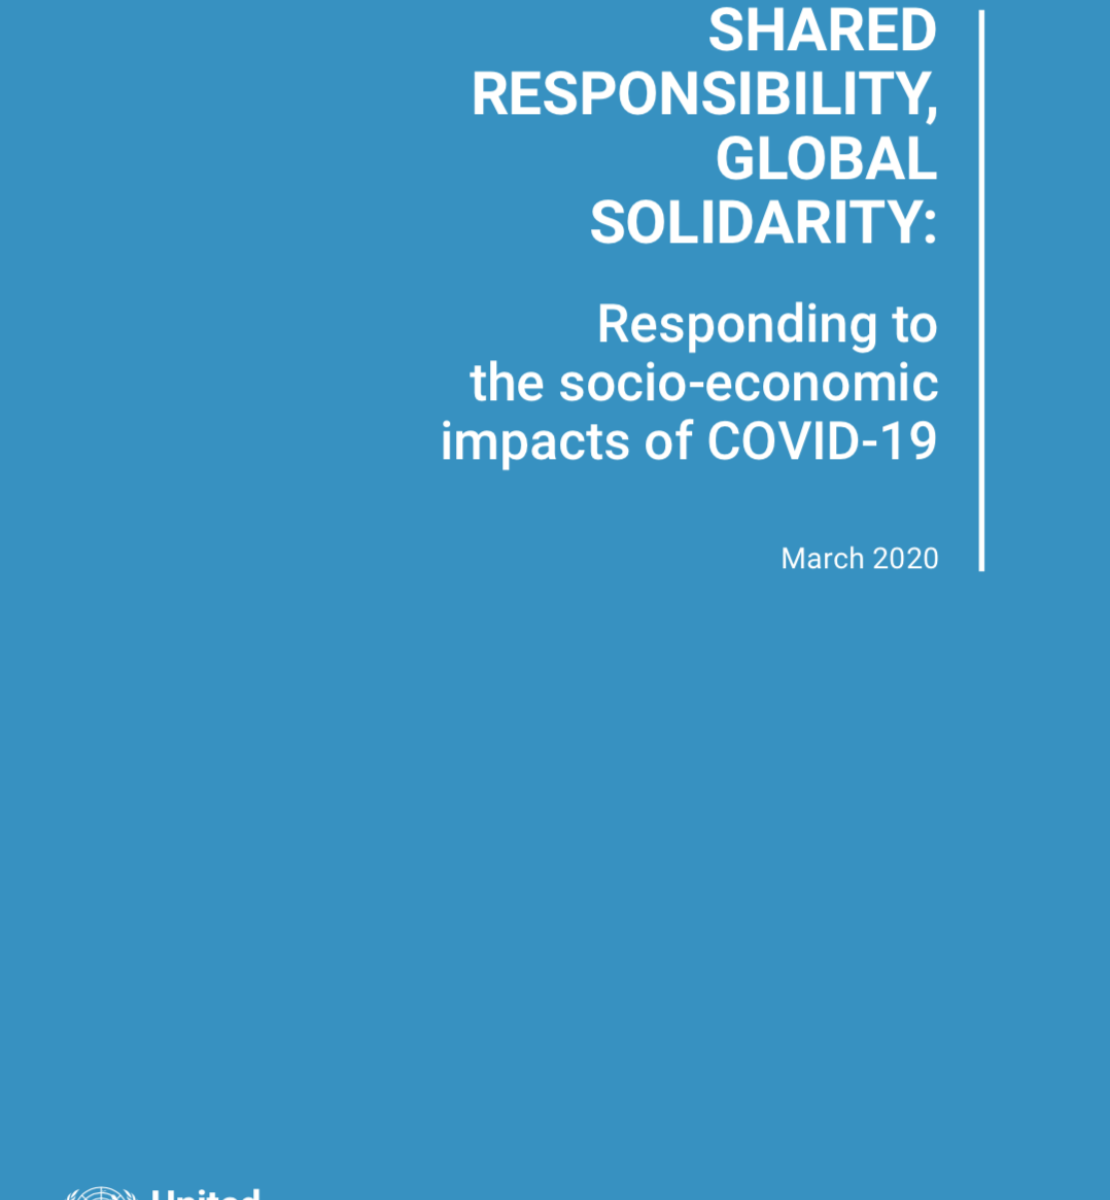 Cover shows the title "Shared Responsibility, Global Solidarity: Responding to the socio-economic impacts of COVID-19" against a solid background with the UN logo on the bottom left.